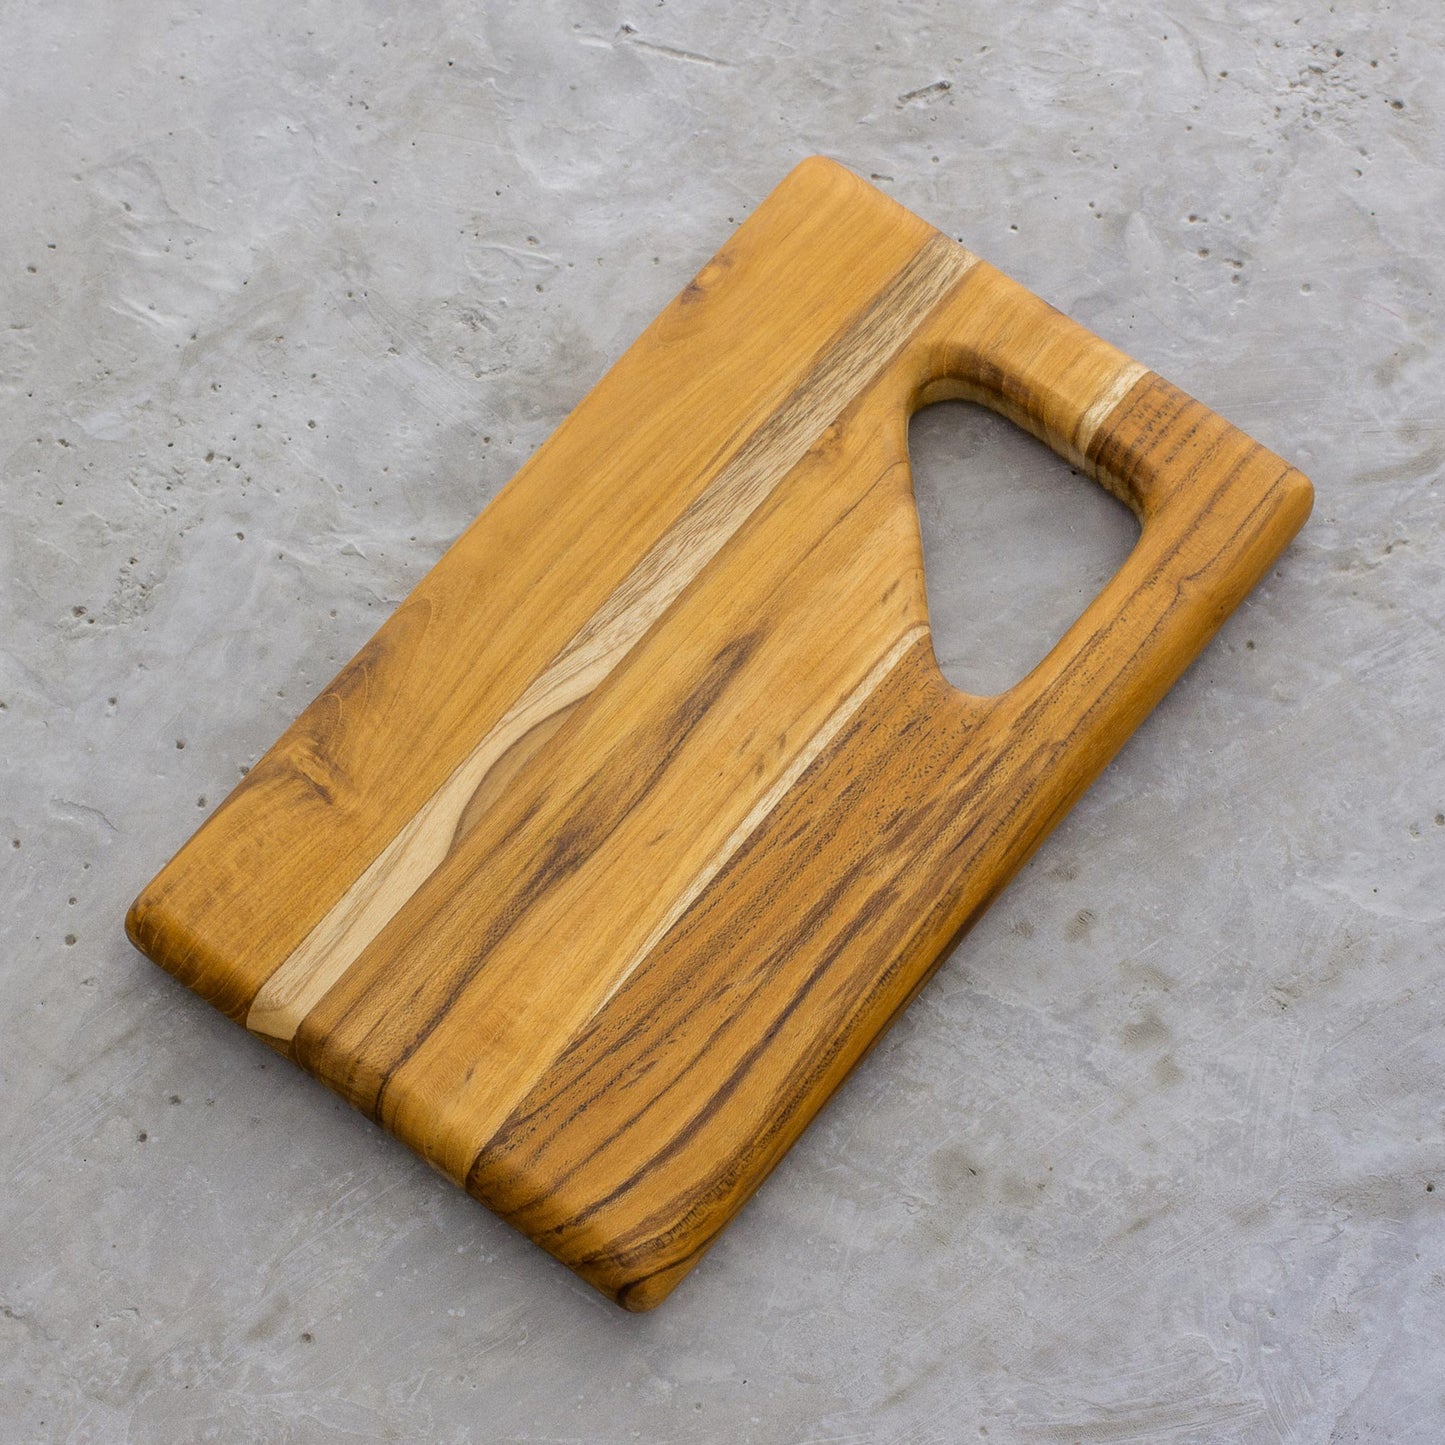 Sophisticated Bartender Teak Wood Cutting Board with a Handle from Guatemala